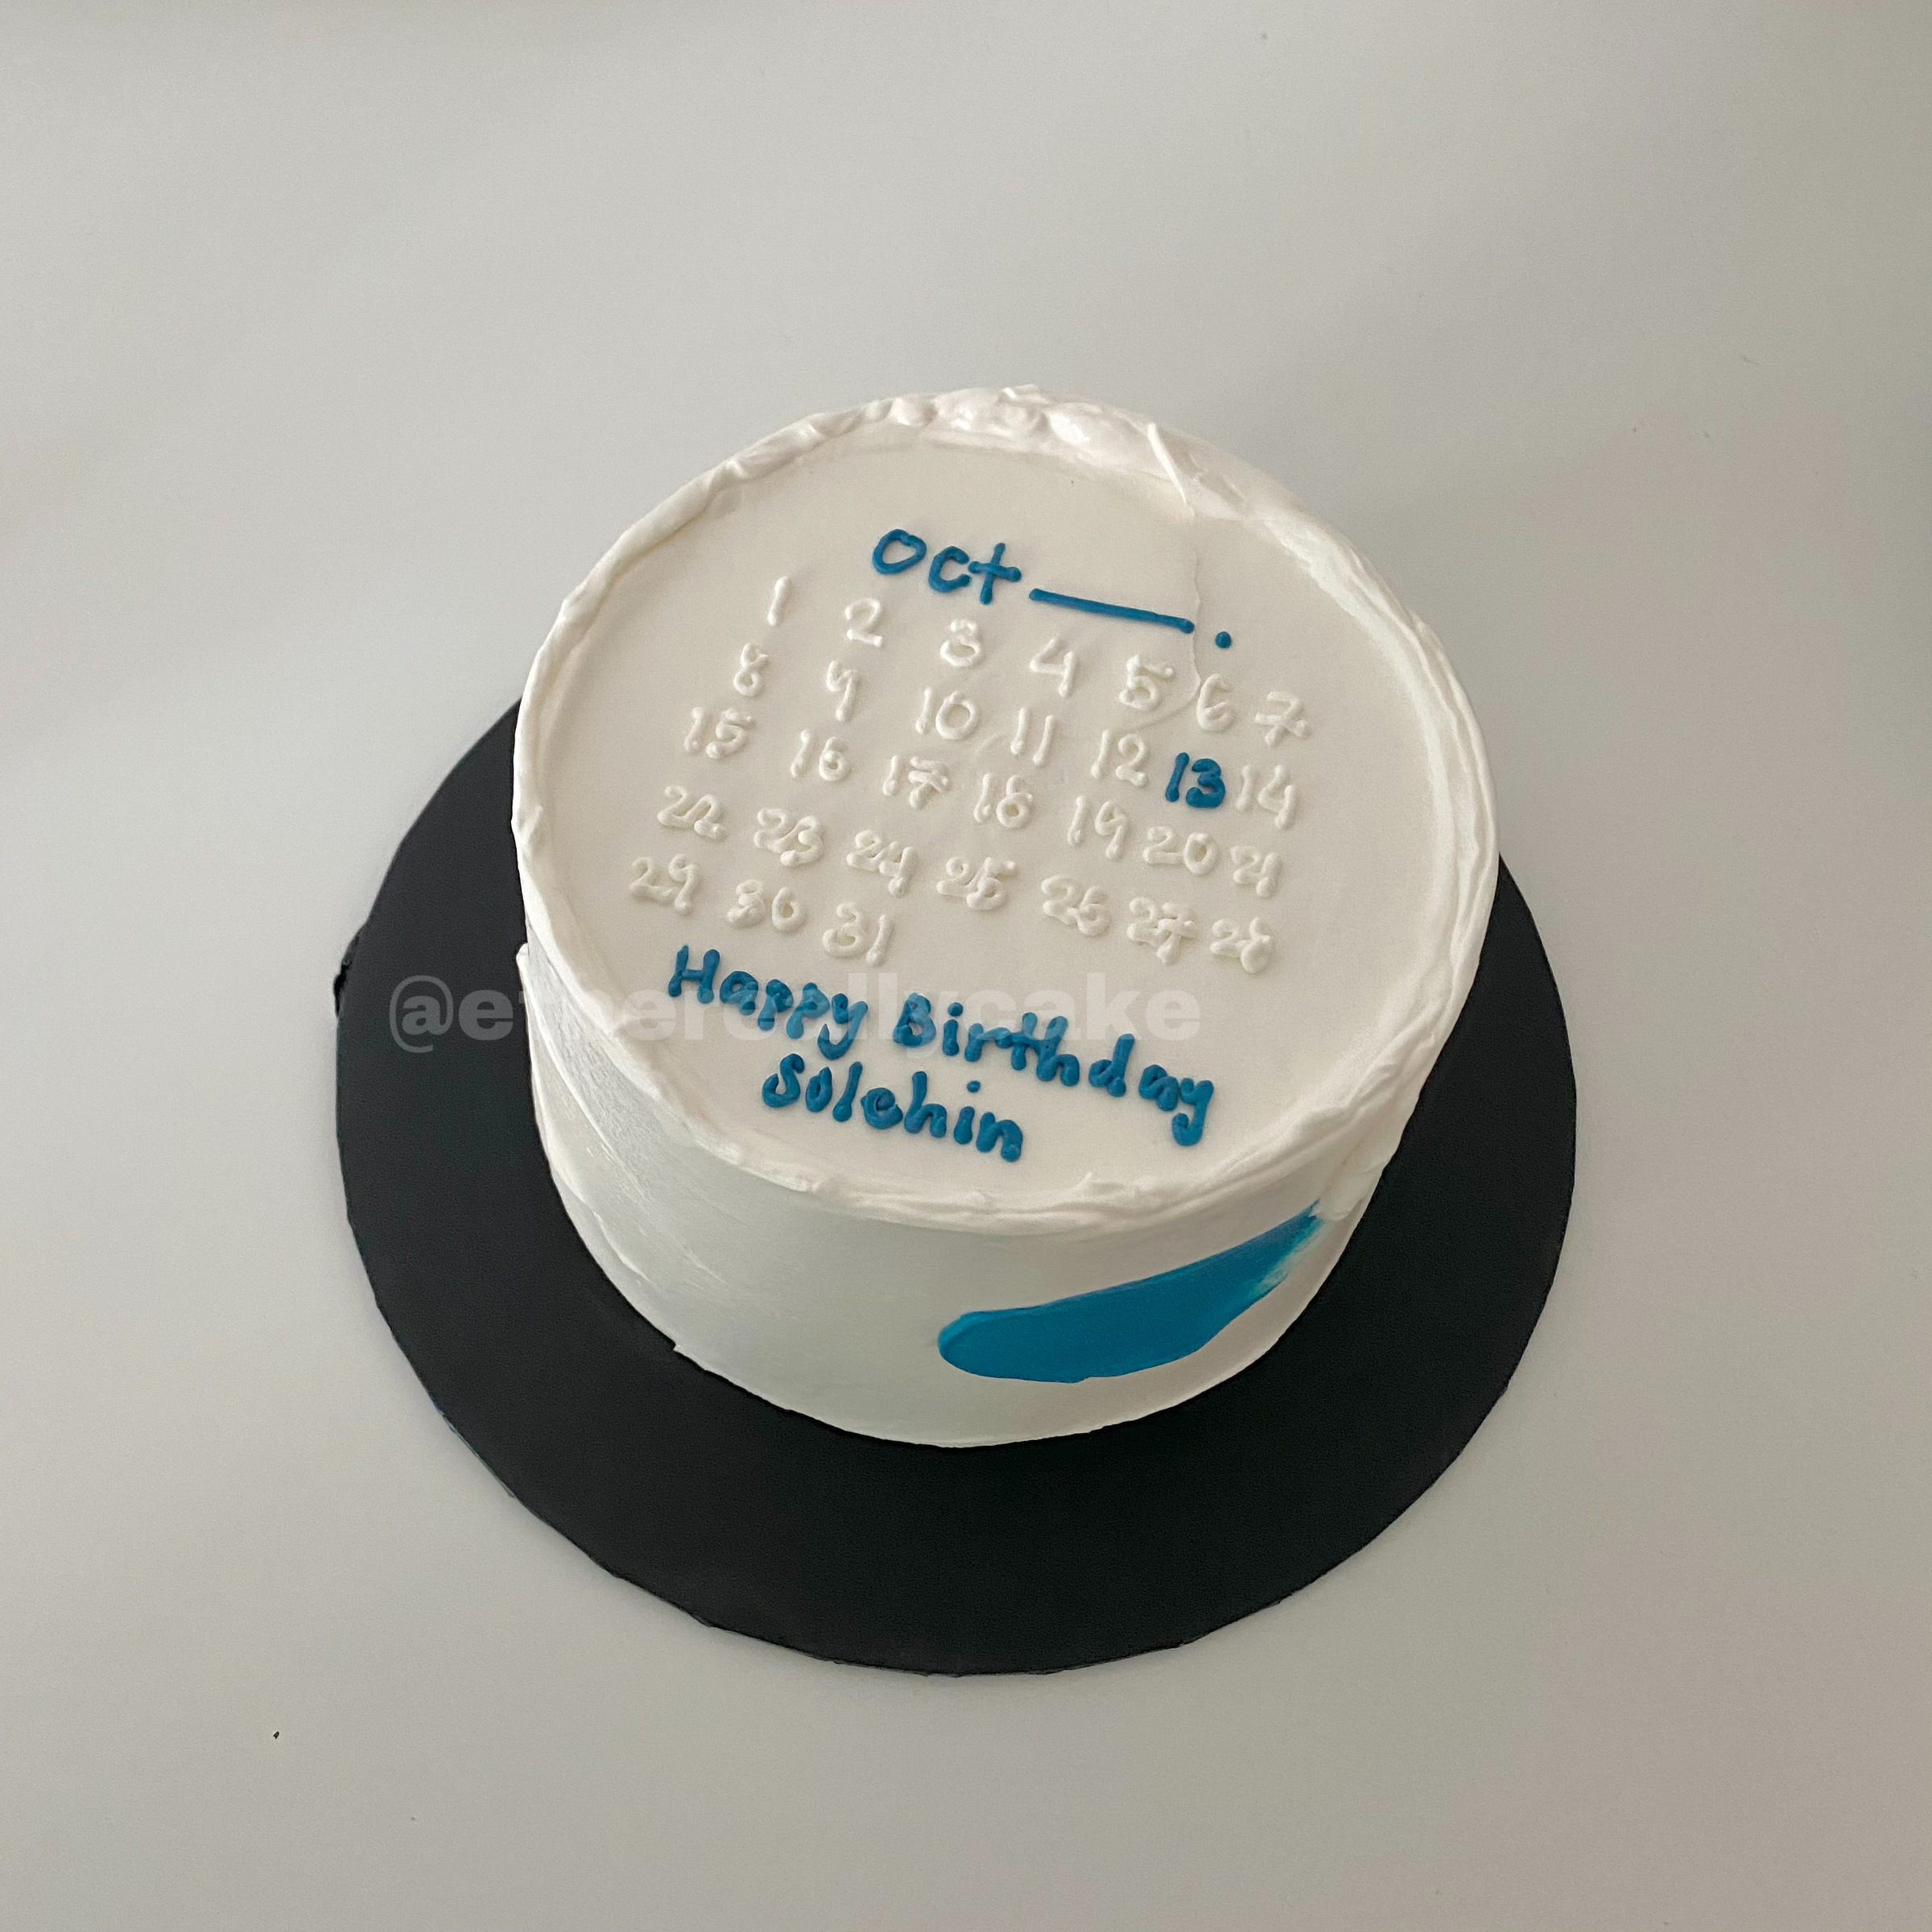 Professional Theme Cakes Online Delivery | YummyCake